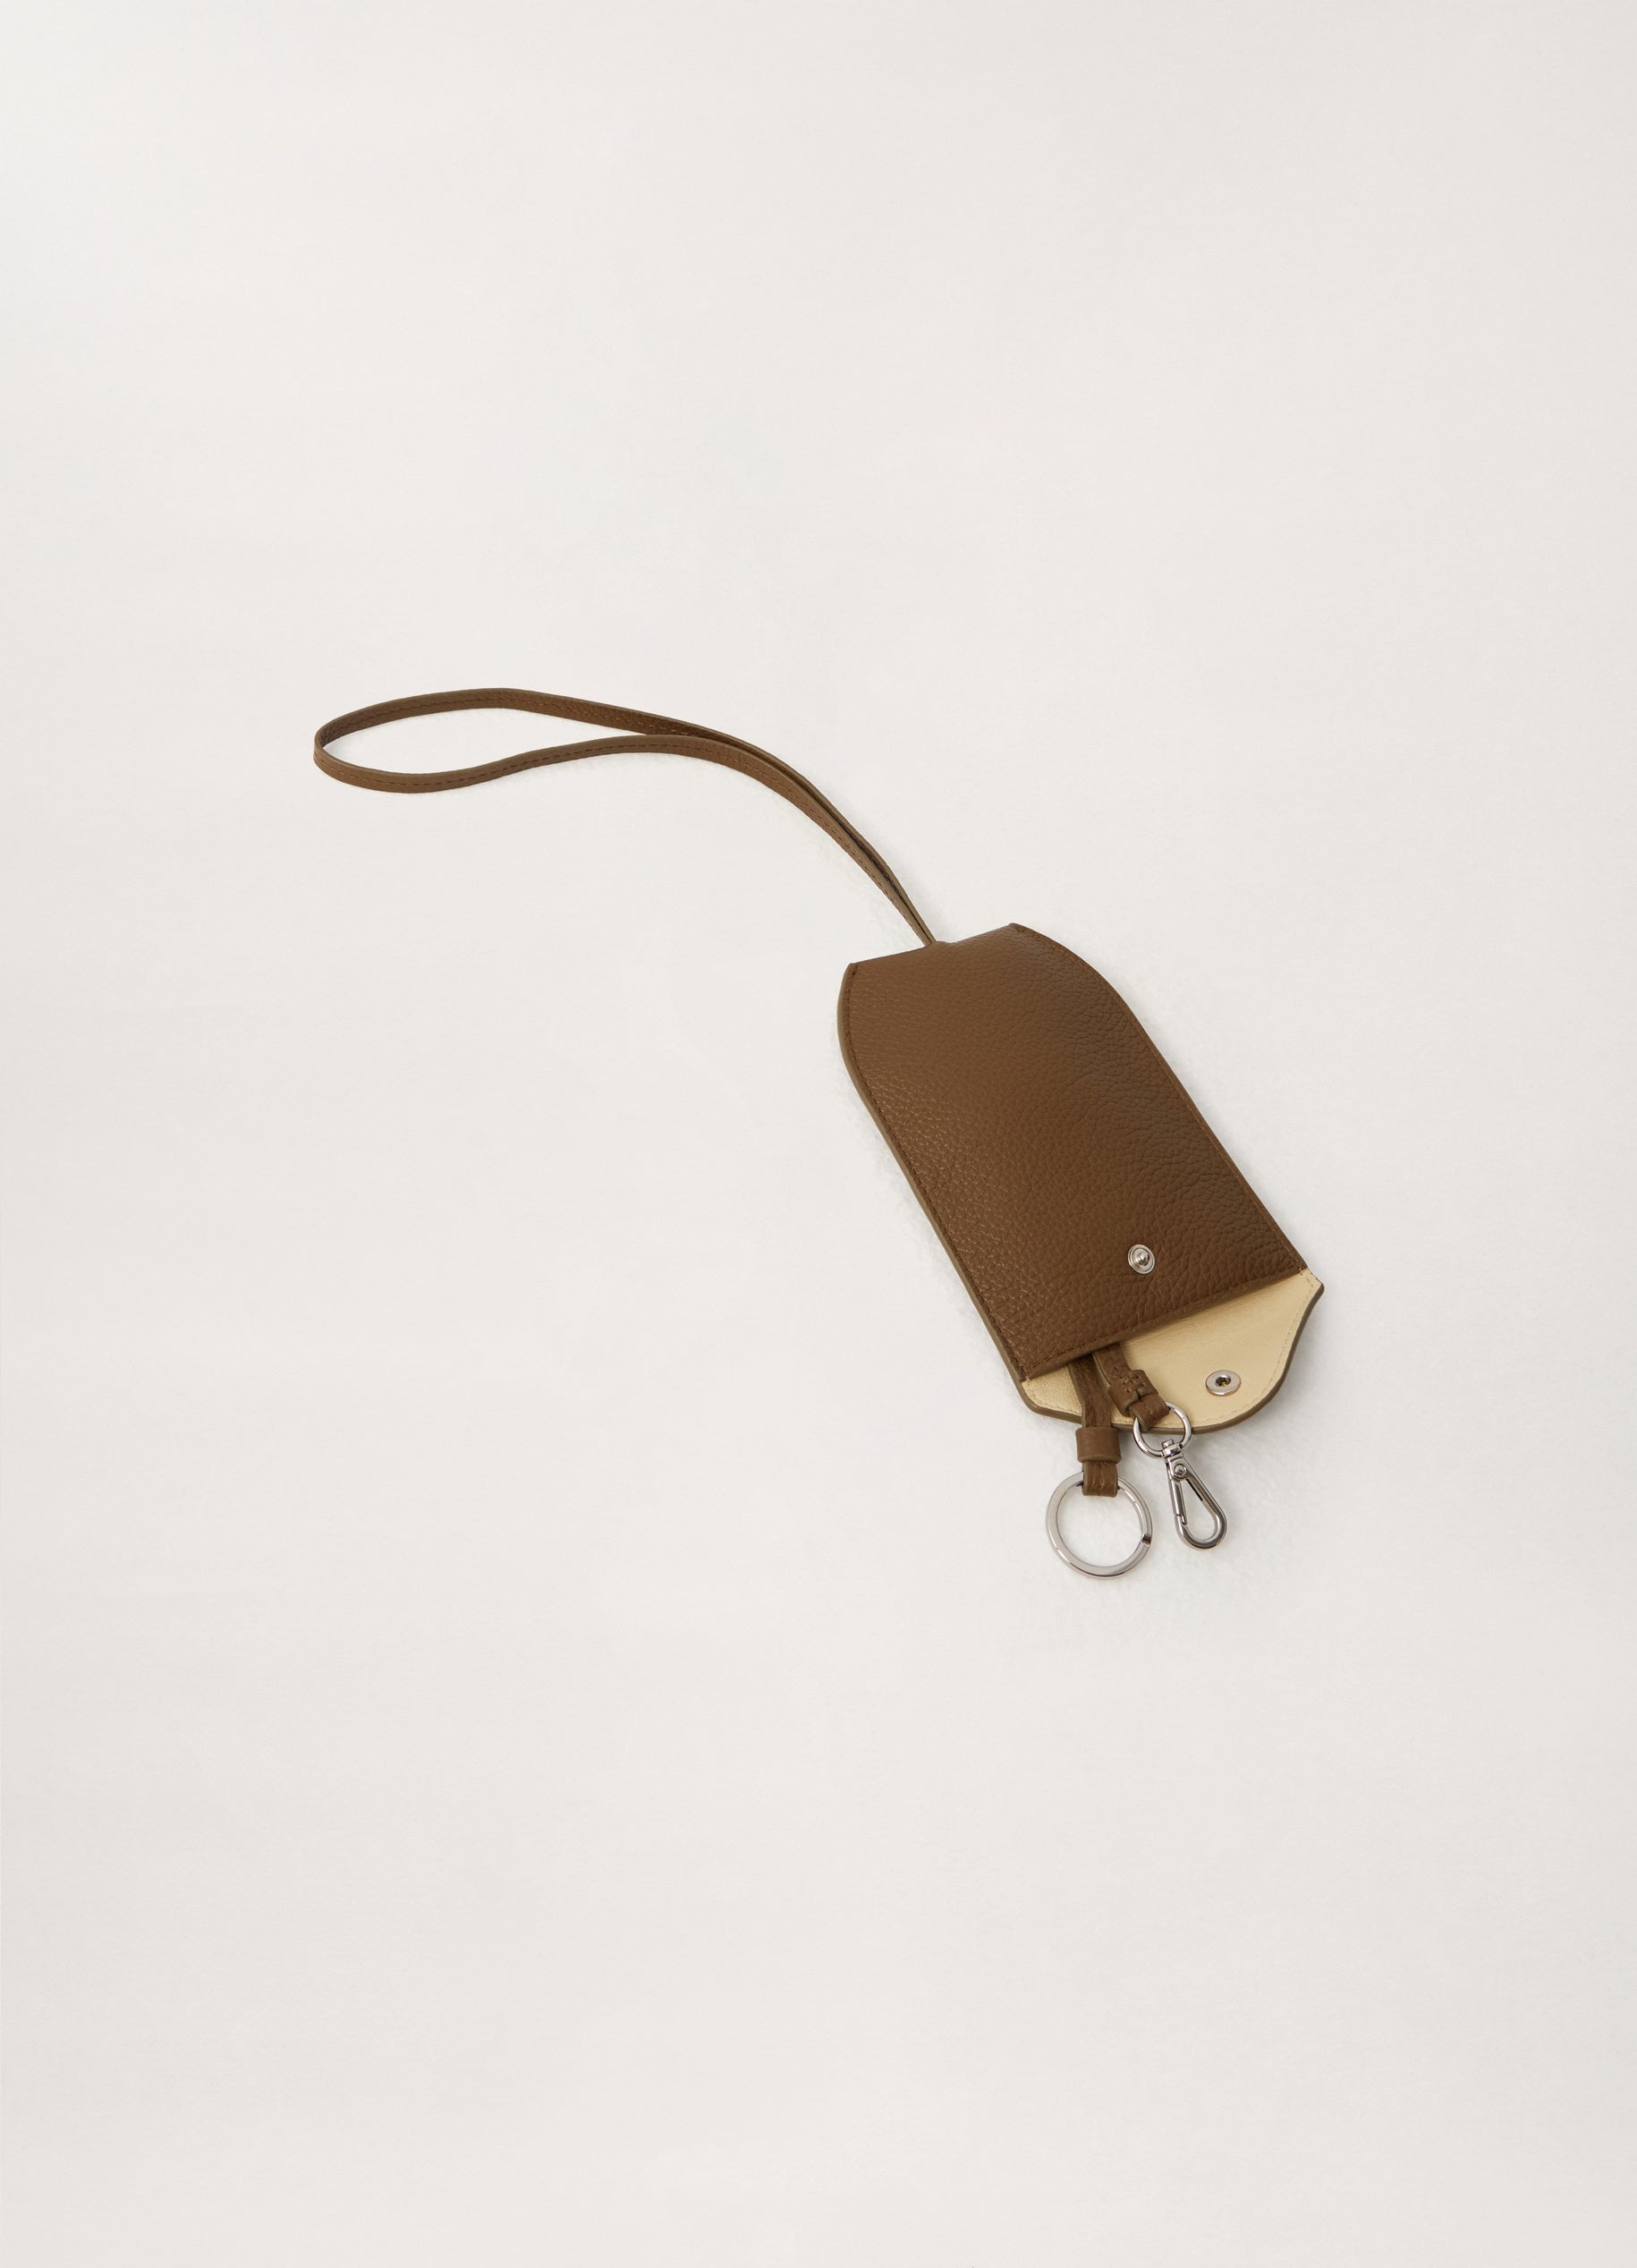 ENVELOPPE KEY RING POUCH
SOFT GRAINED LEATHER - 1